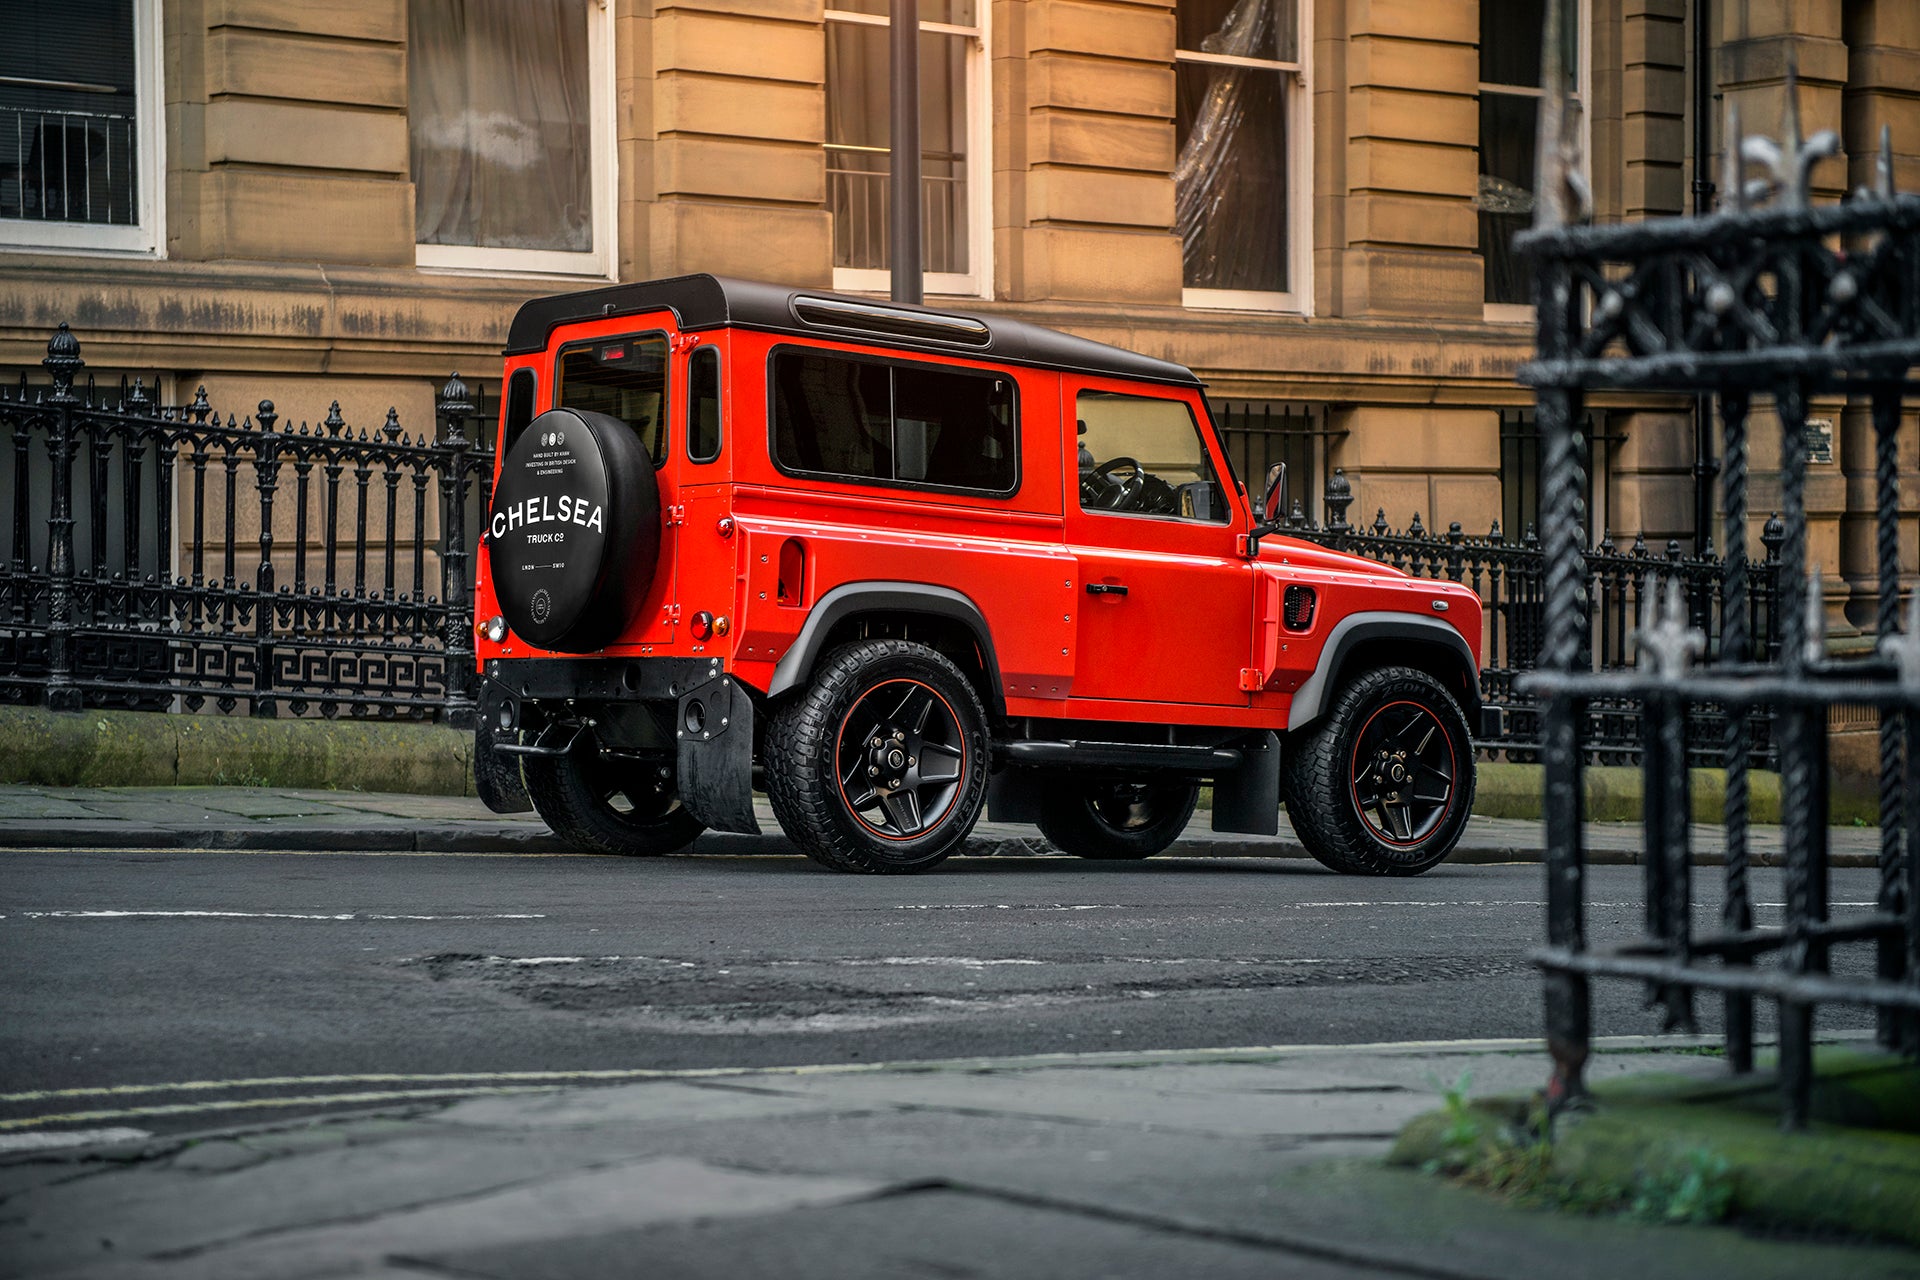 Erupting With Chelsea Truck Company Style: Lava Orange Defender 90 - The End Edition